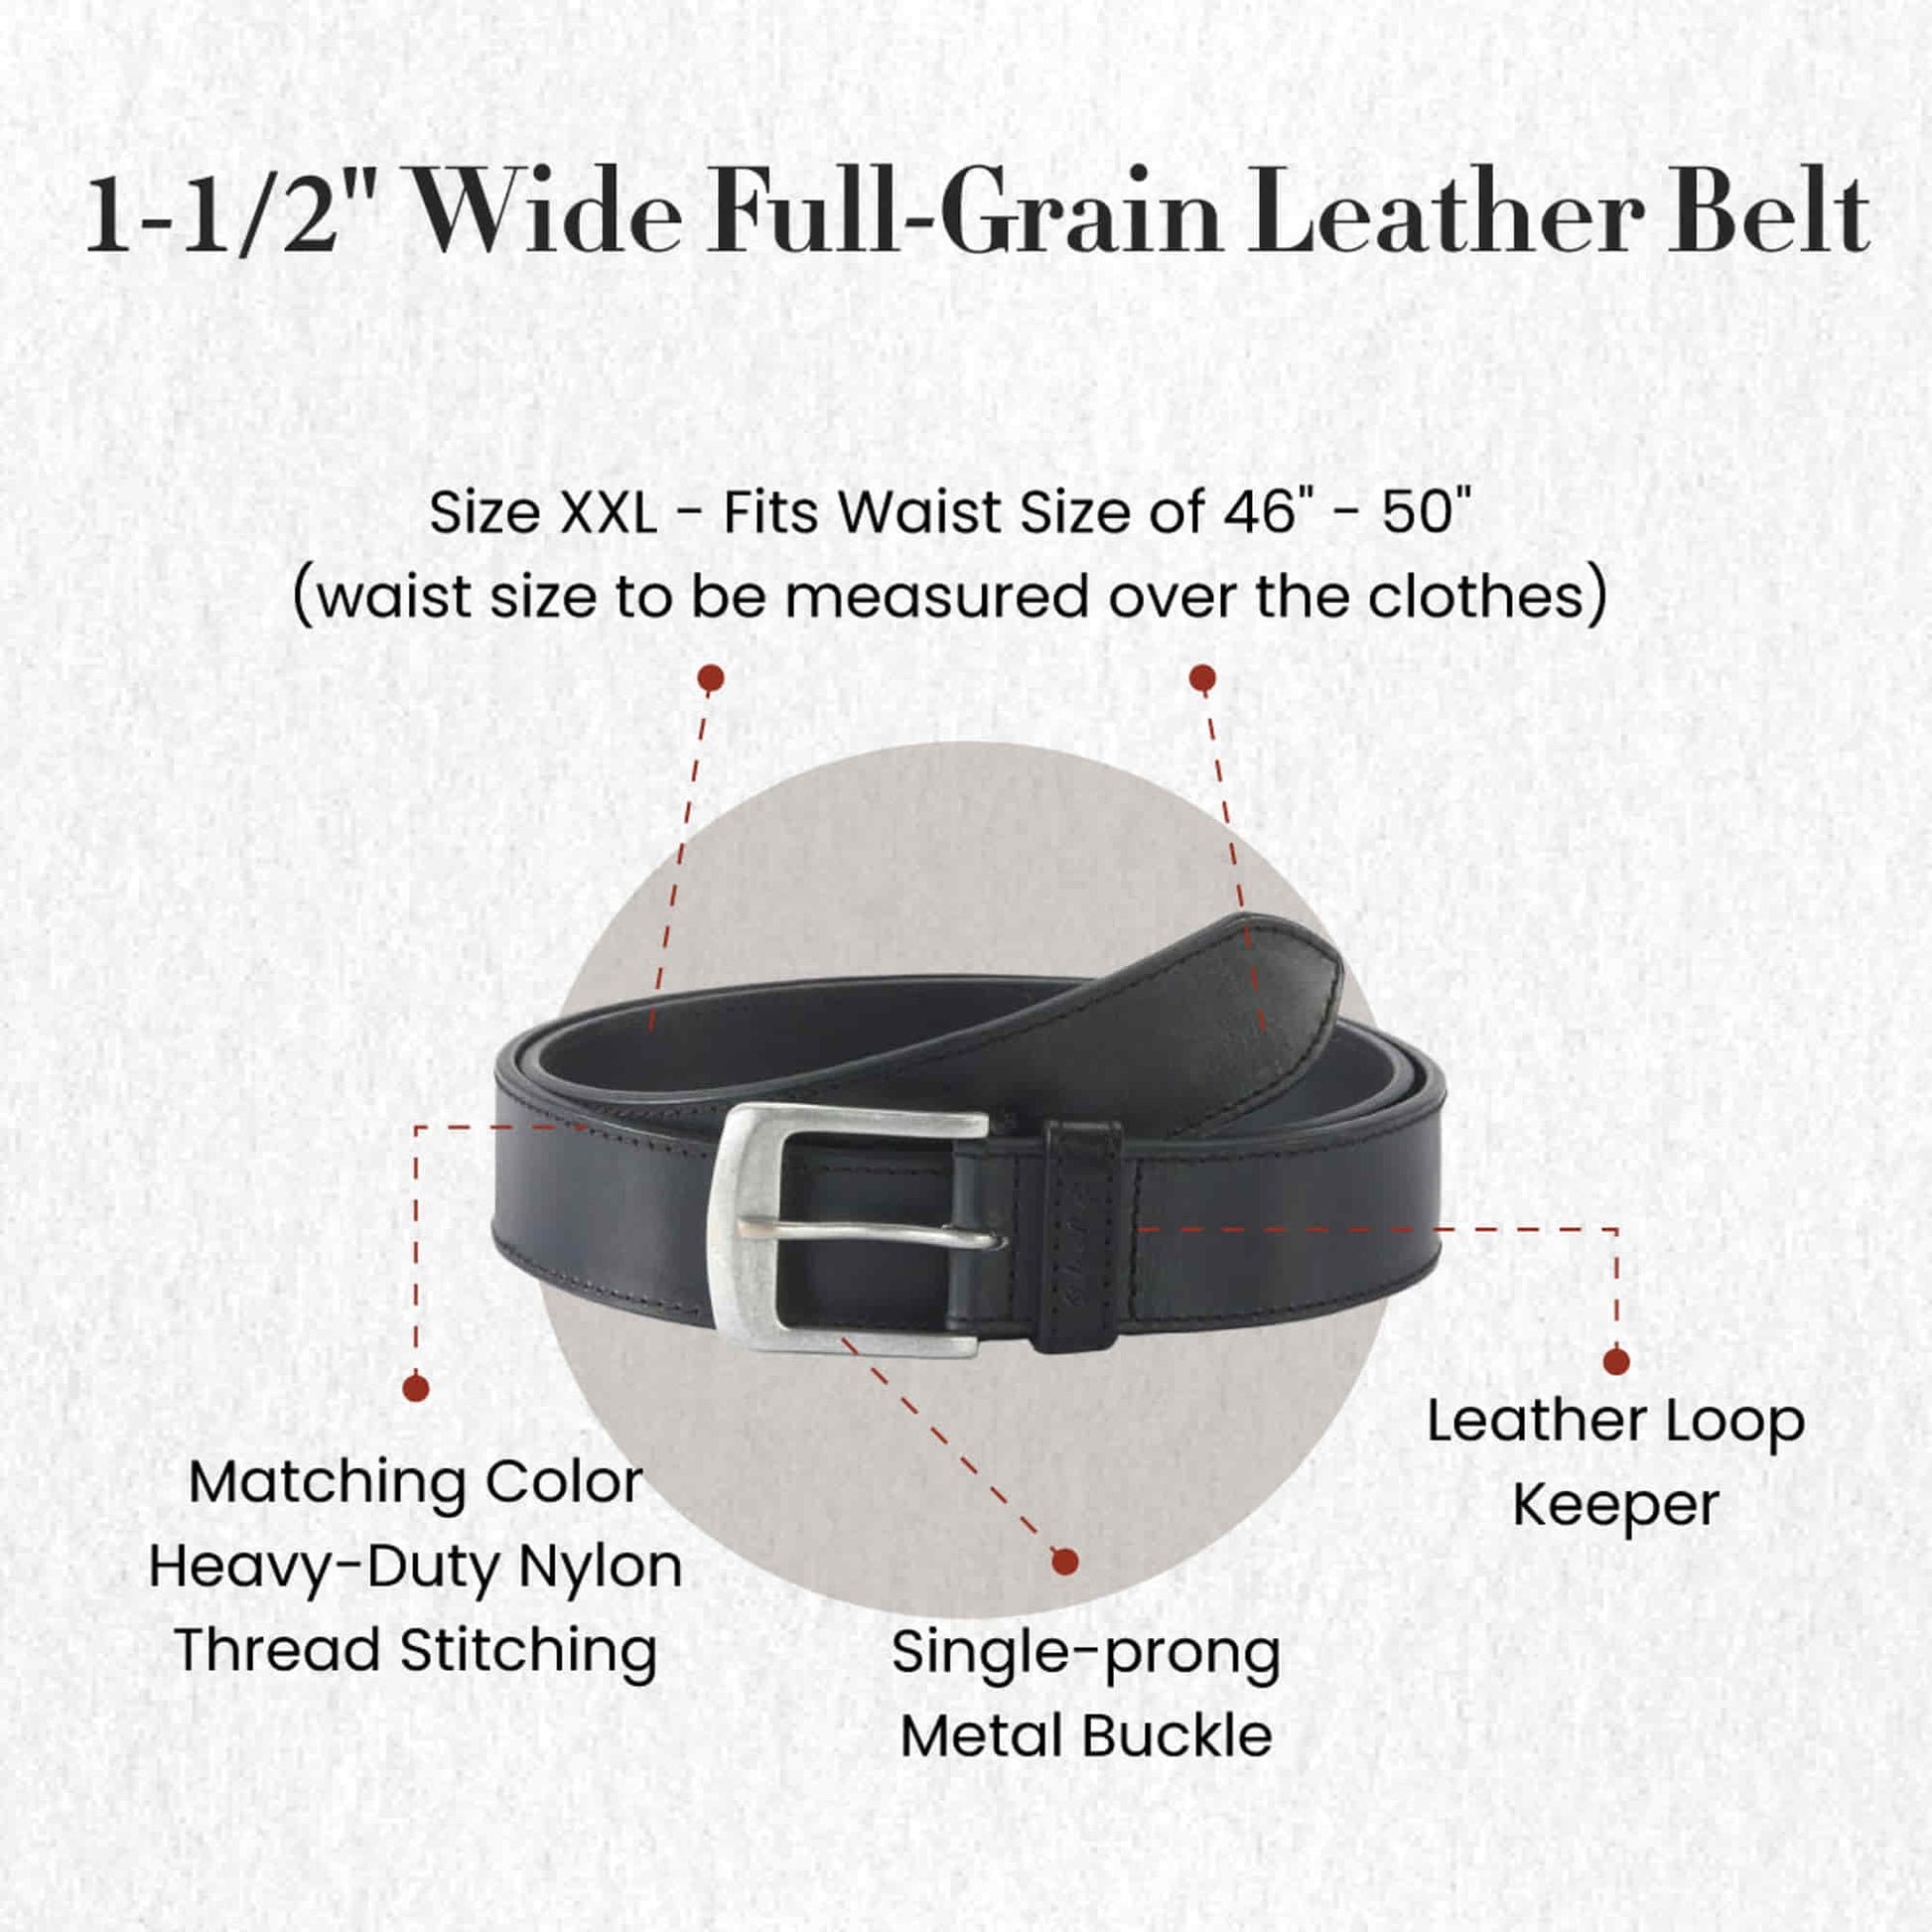 392701-XXL - one and a half inch wide double extra large size leather belt in black color full grain leather - front view showing the details